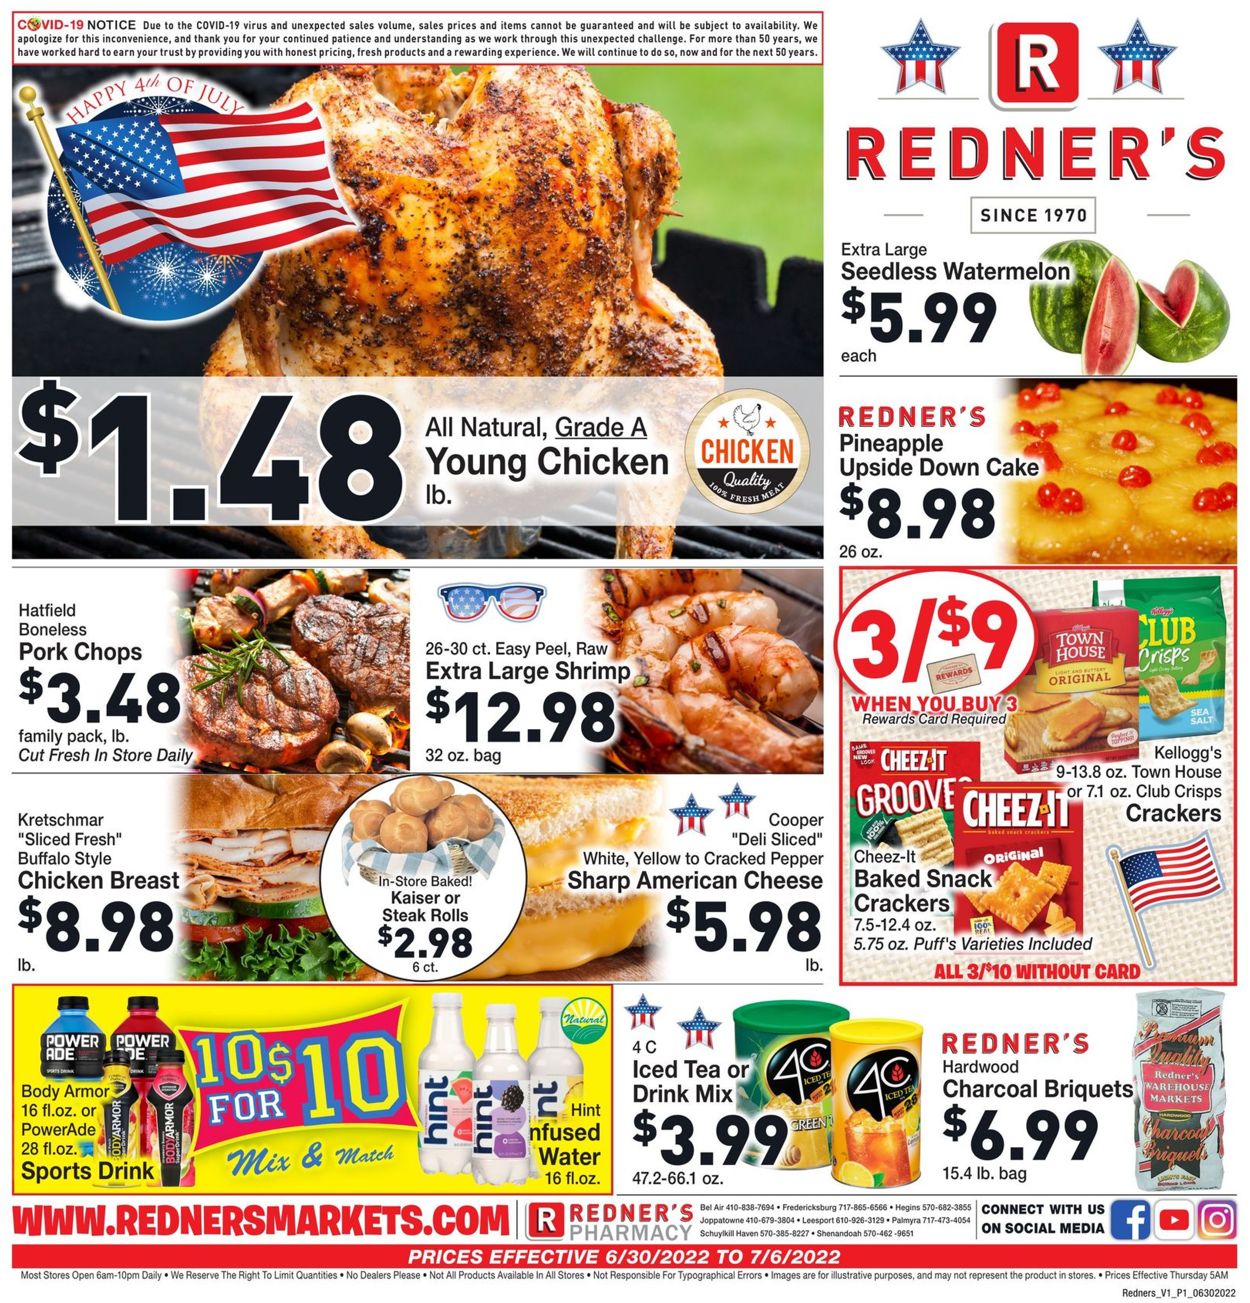 Redner’s Warehouse Market - 4th of July Sale Weekly Ad Circular - valid 06/30-07/06/2022